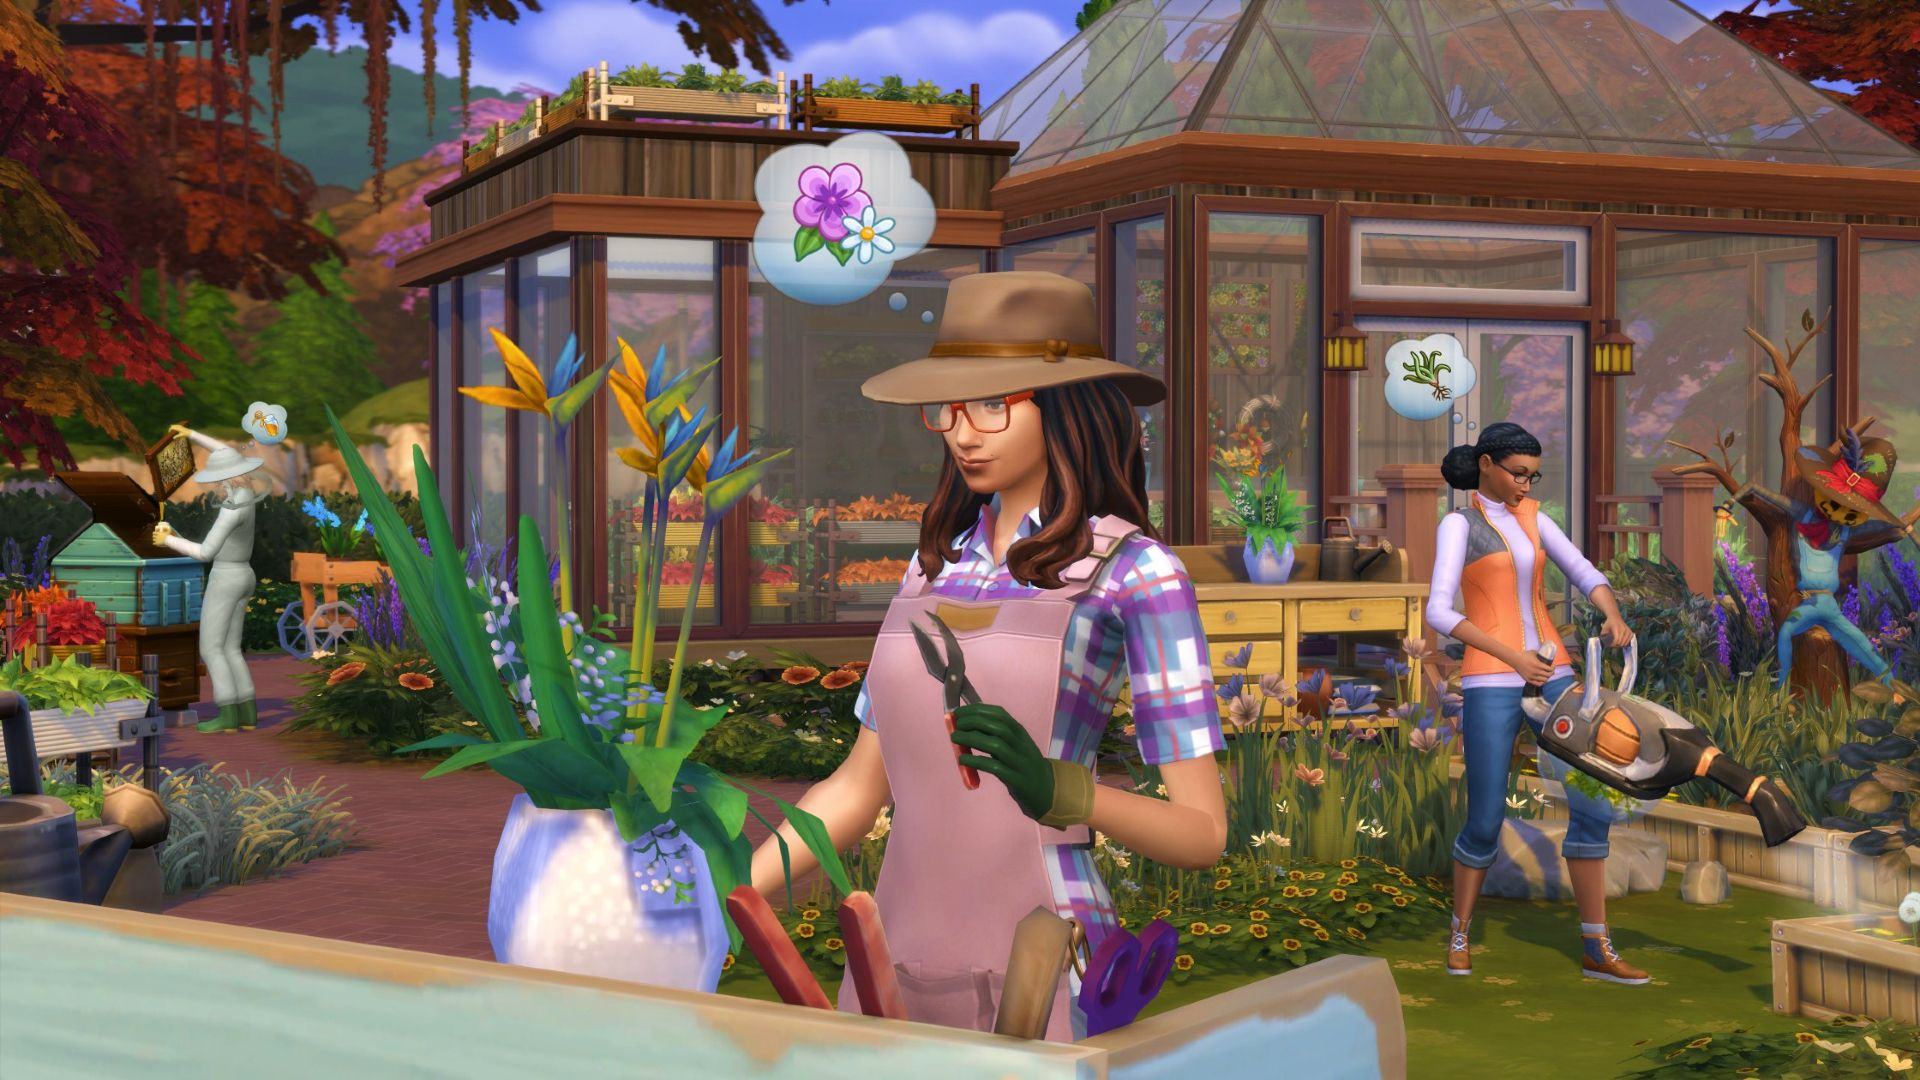 The Sims 4 Sim Improving Gardening Skill By Pruning Flowers With Clippers Outdoors